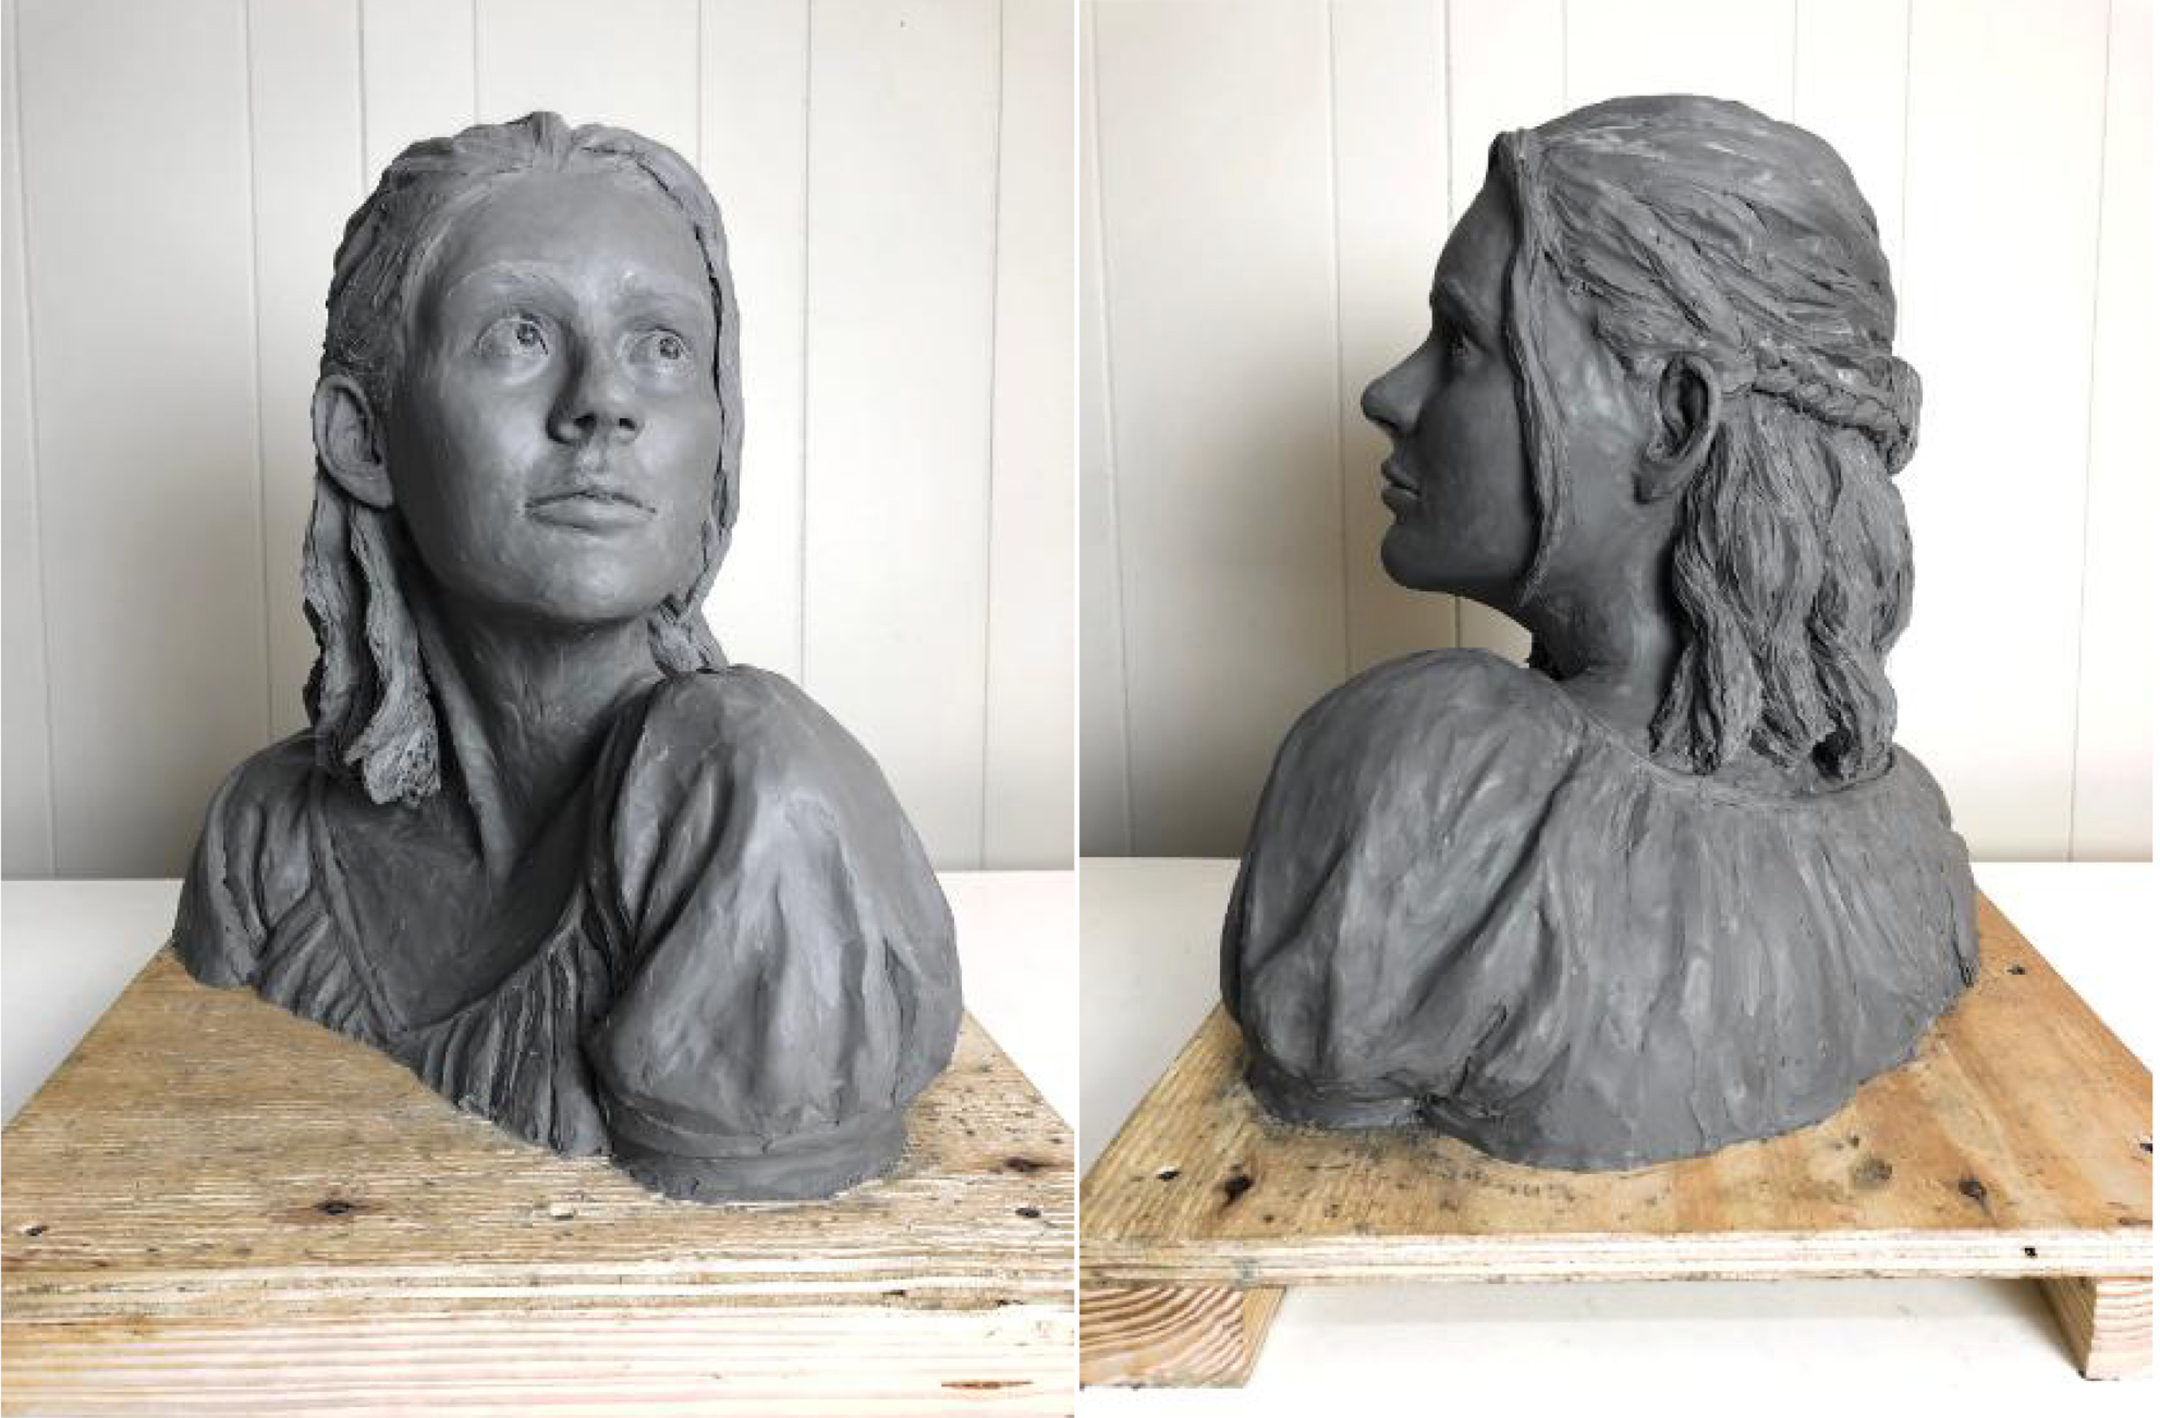 Two views of a gray statue of a young woman's head and face